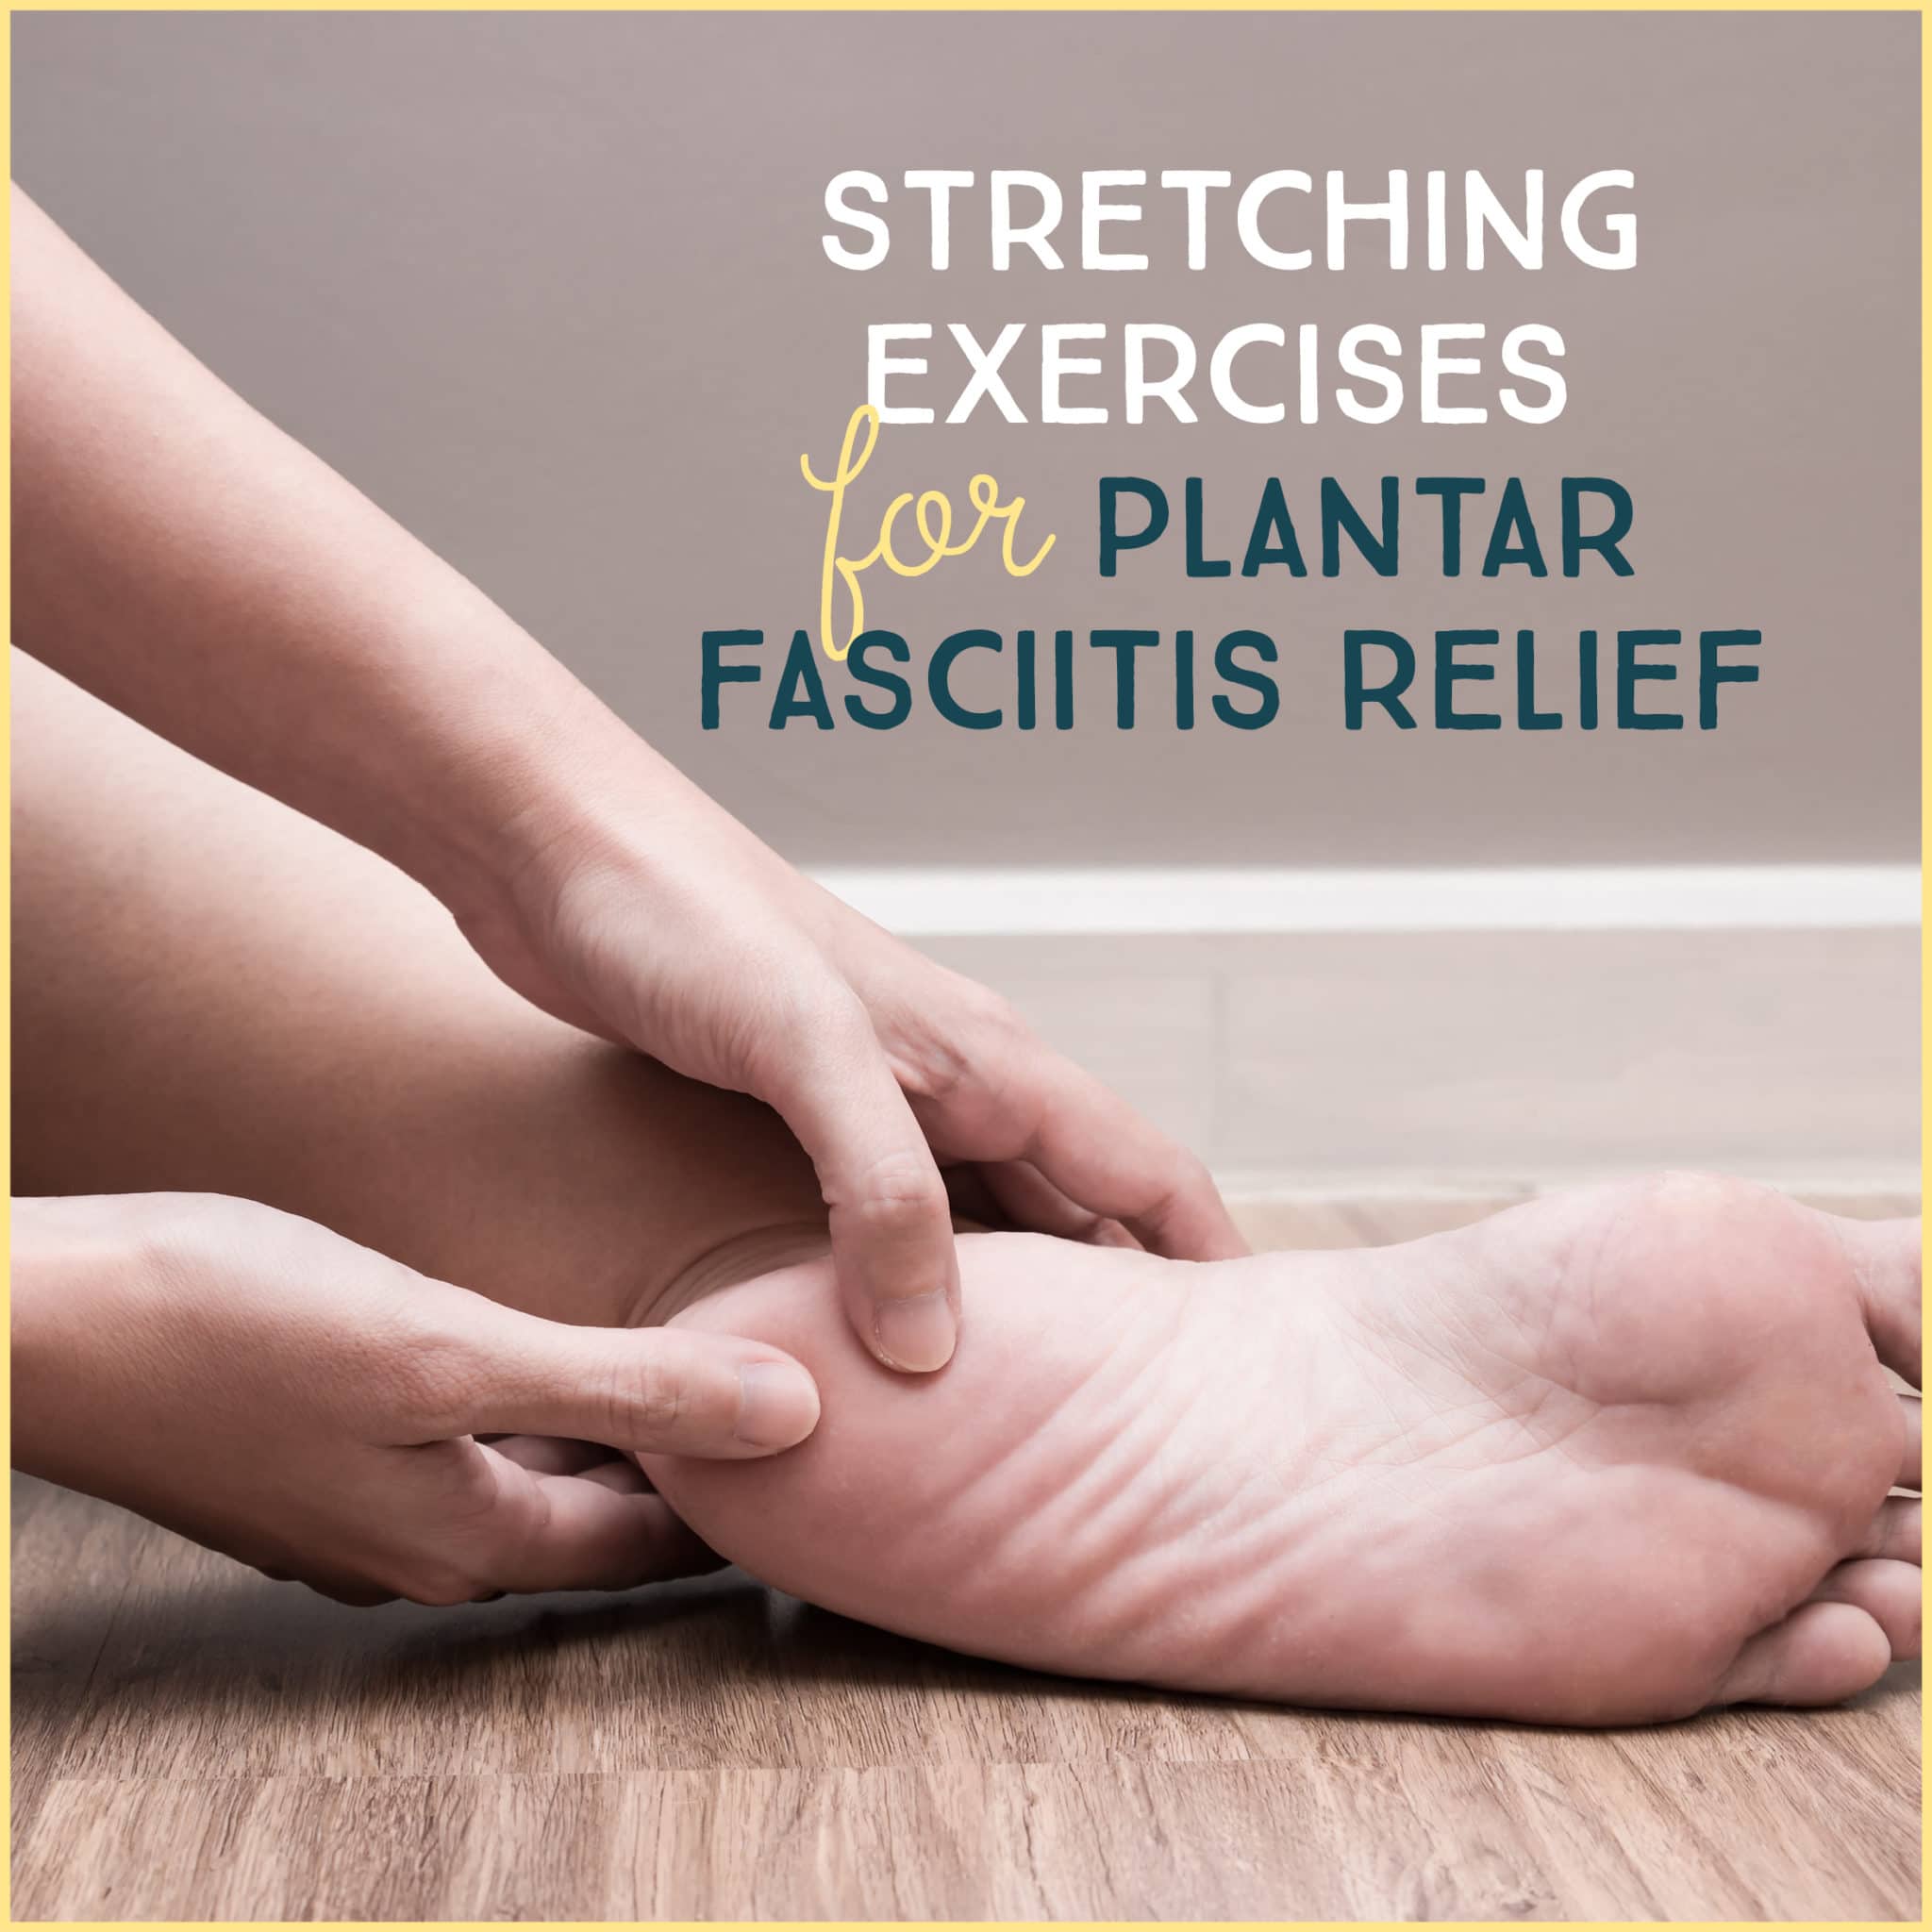 The plantar fascia is a thick band of connective tissue that